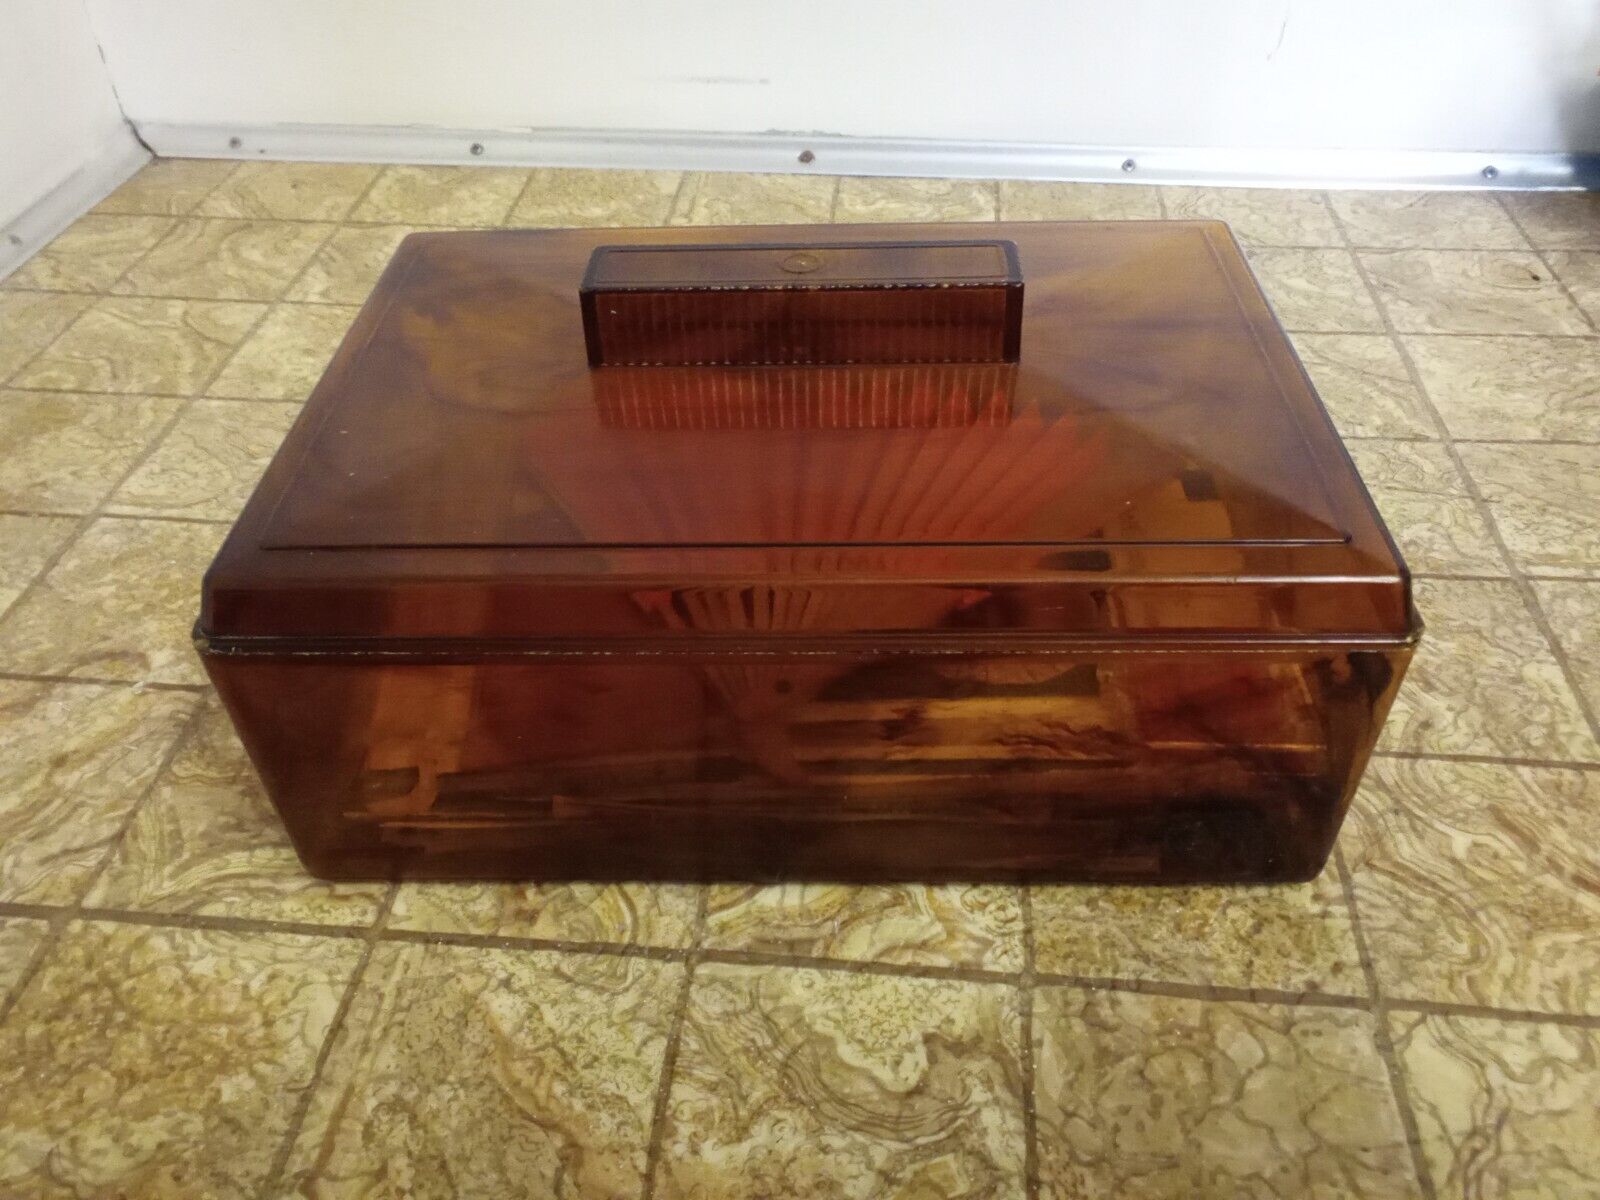 Dunhill Sta-fresh Valve Humidor 1960s Full of historic newspaper clippings 